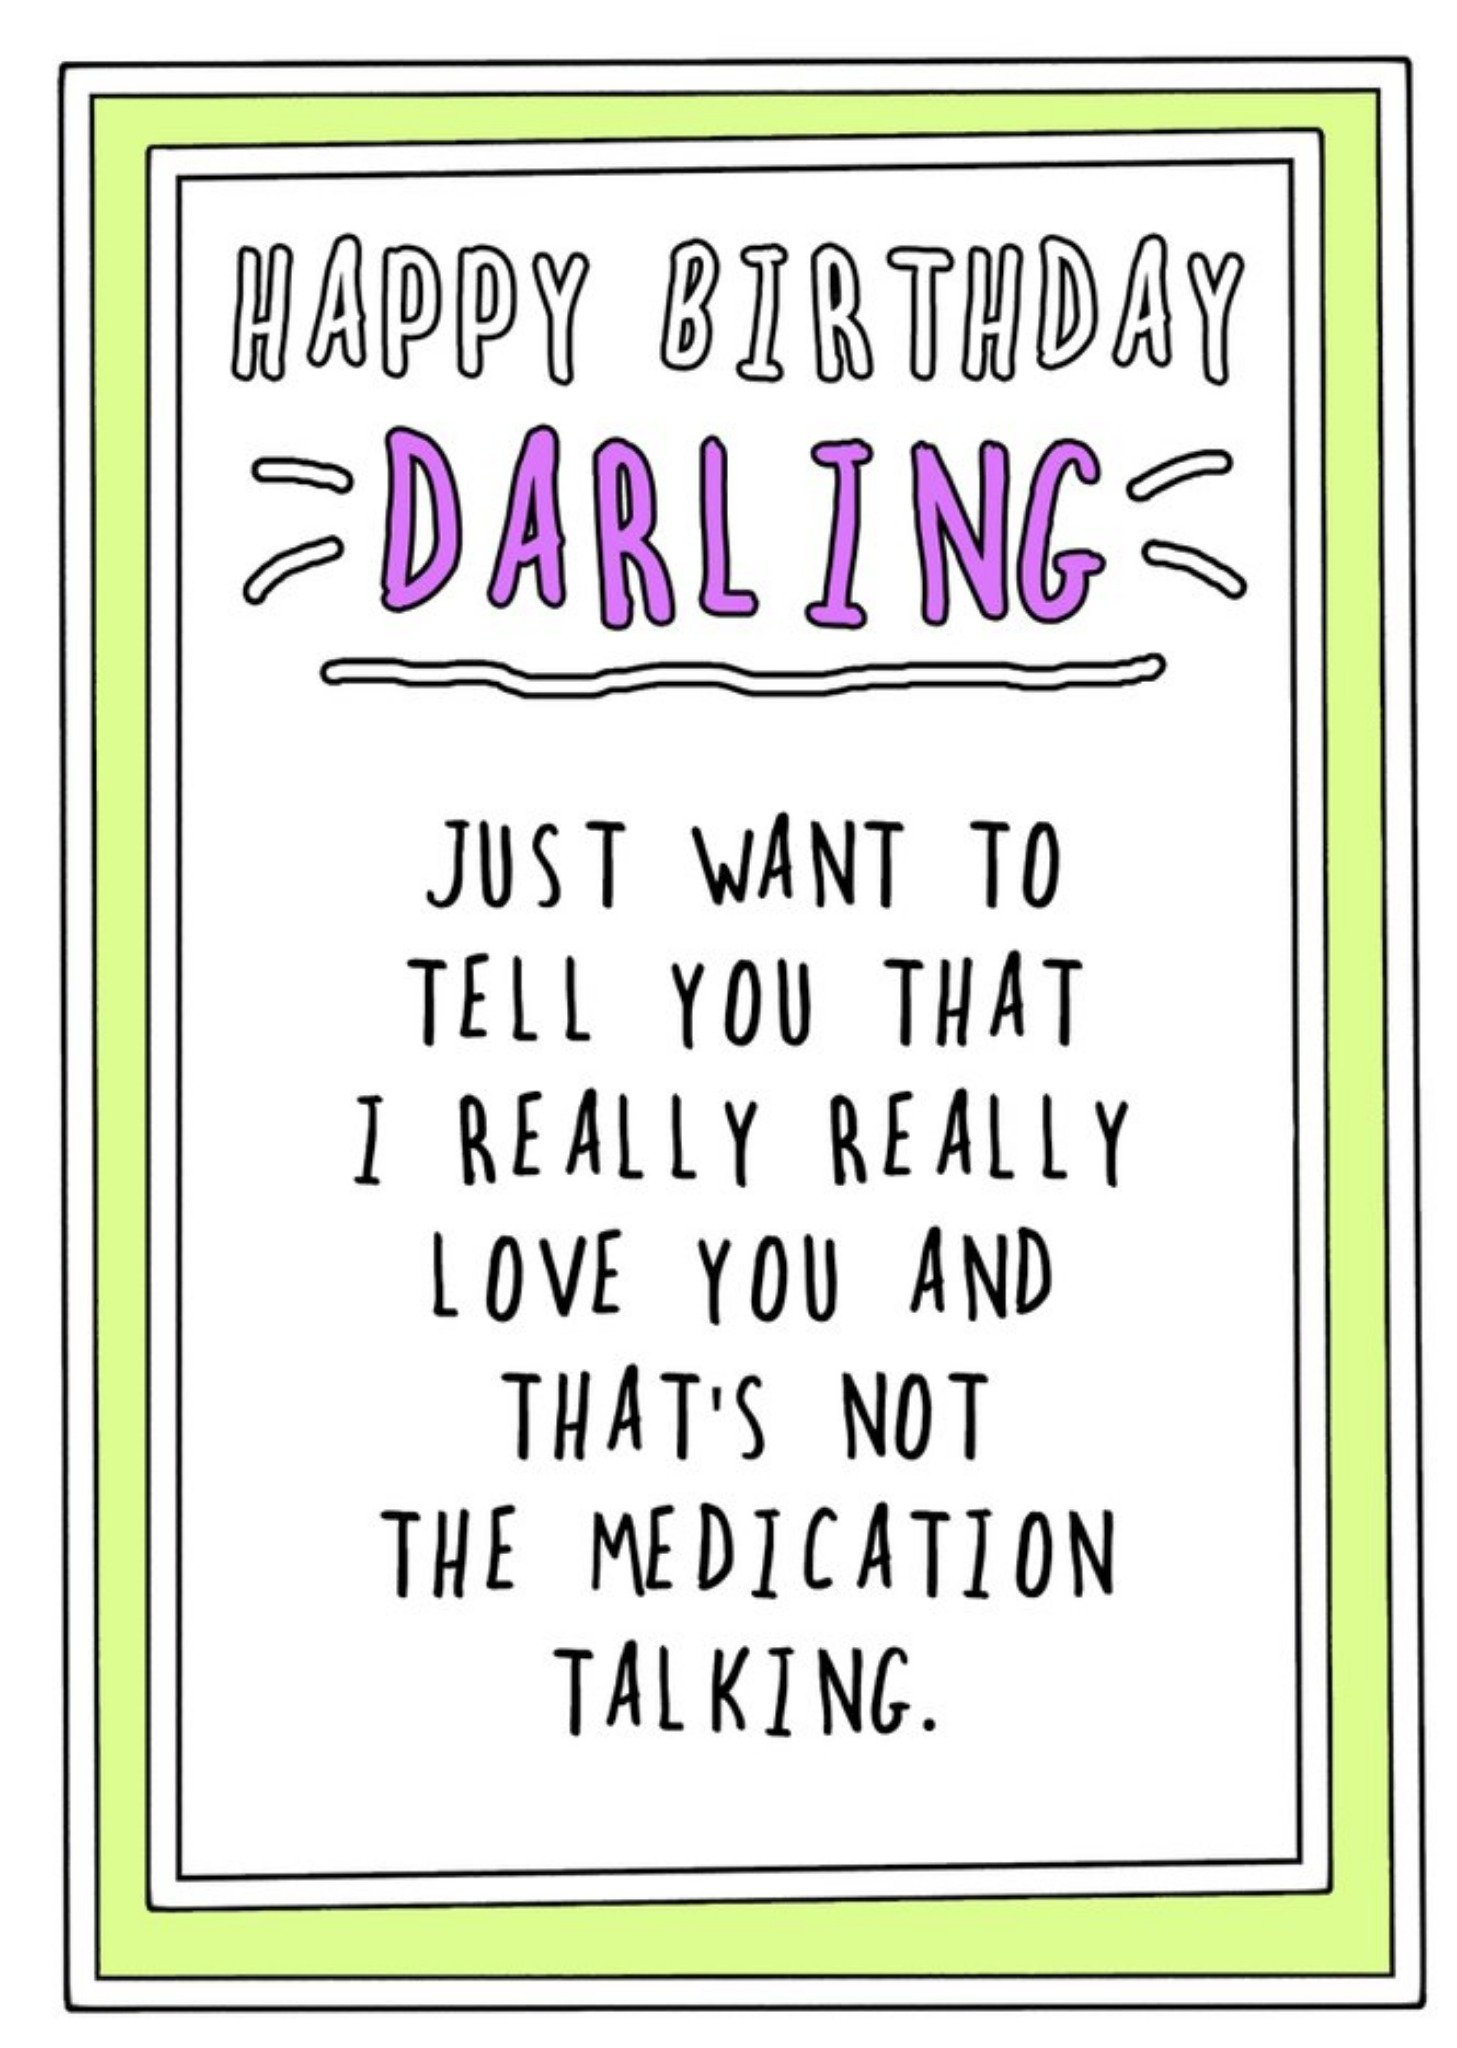 Go La La Humourous Handwritten Text With A Lime Green Border Darling Birthday Card, Large